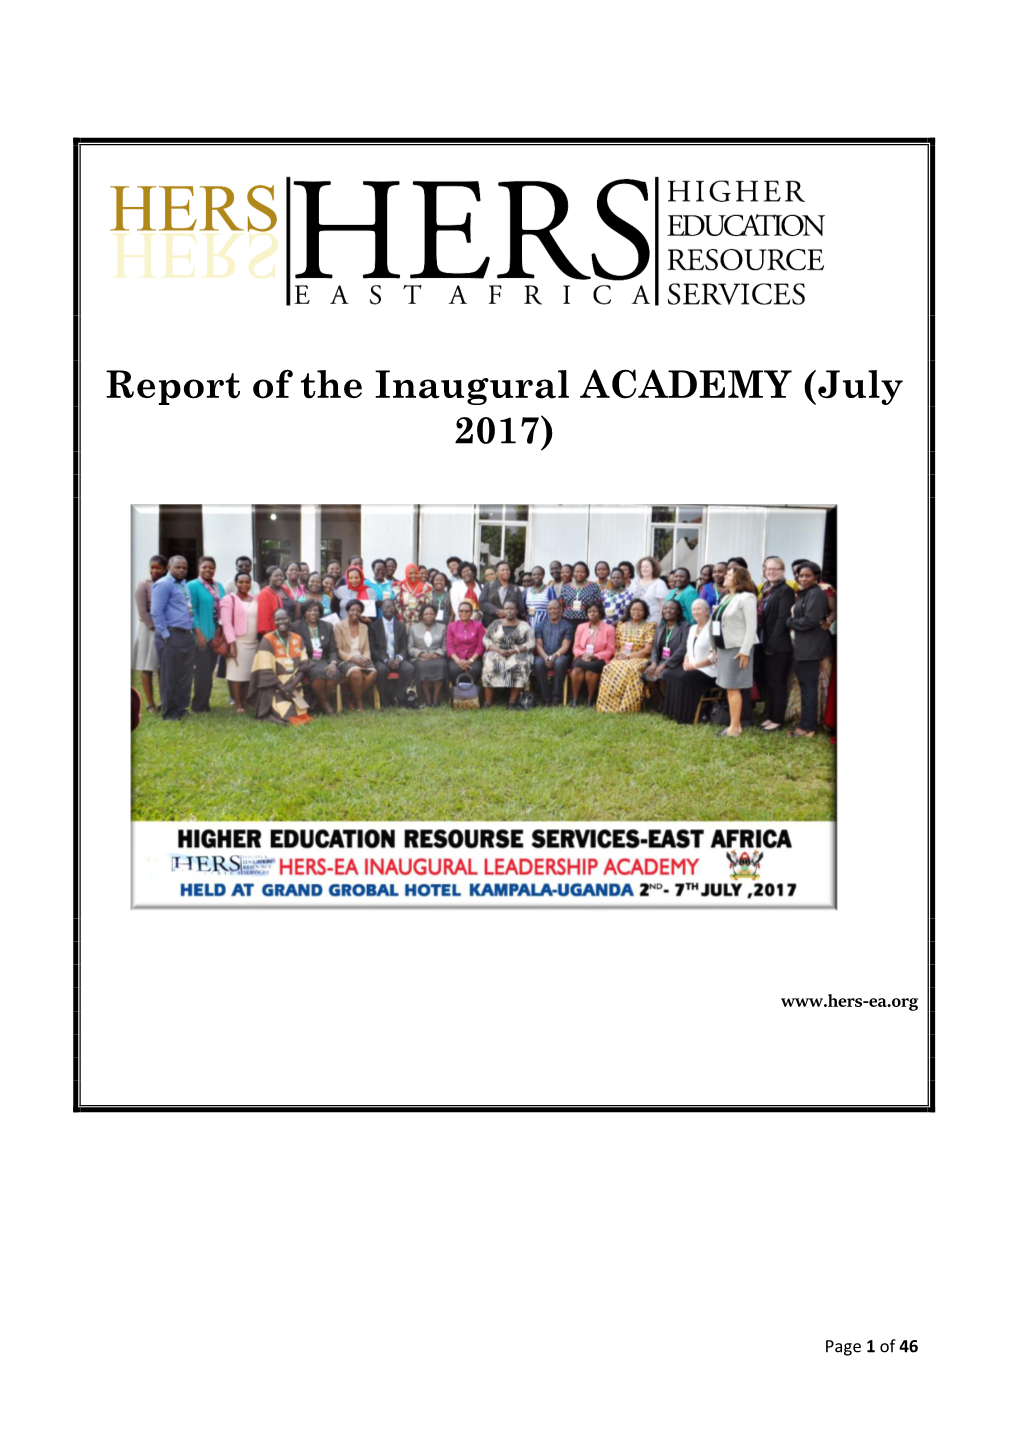 Report of the Inaugural ACADEMY (July 2017)